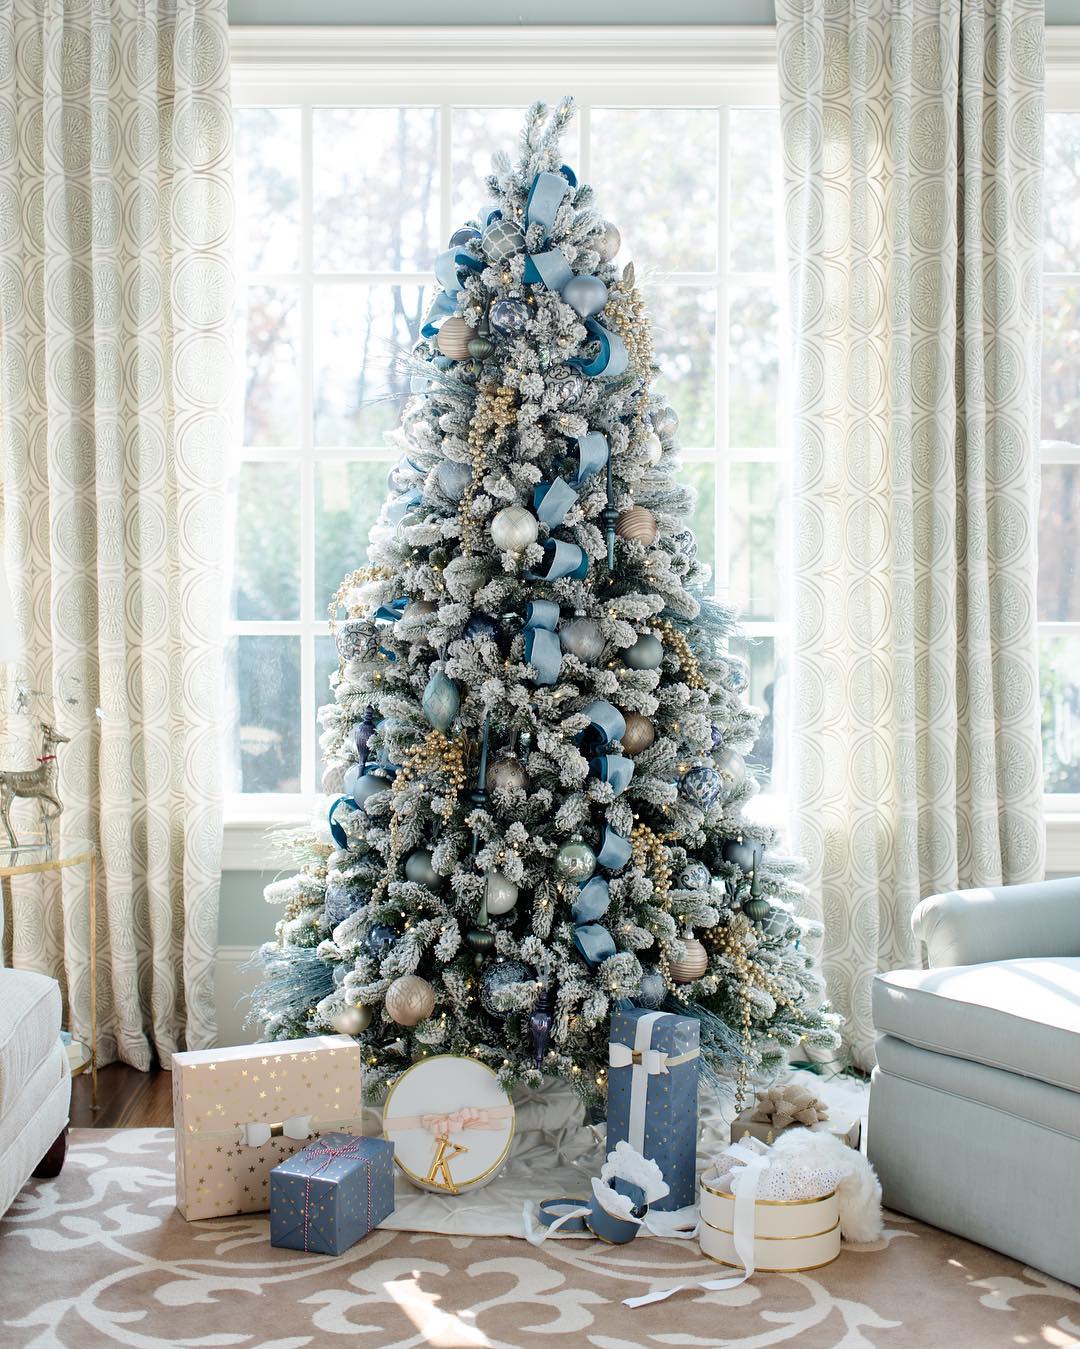 19 Holiday Cleaning Tips That Make Tidying Up Easy